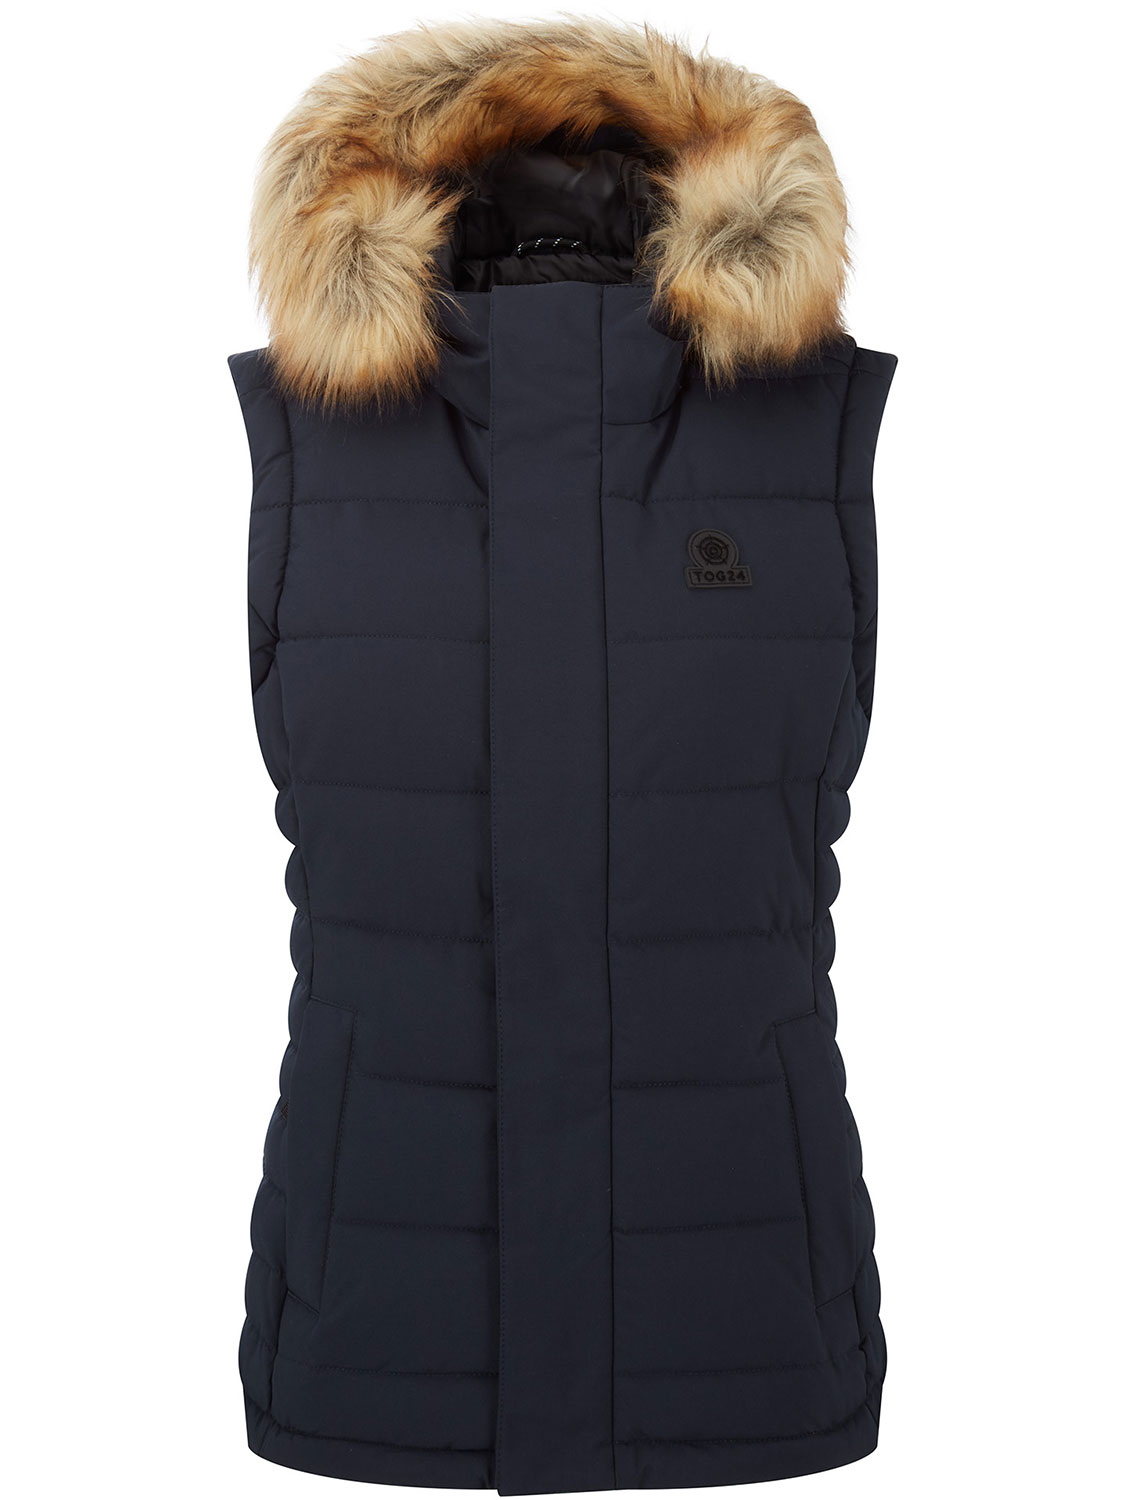 Cowling Insulated Gilet - Size: 10 Blue Tog24